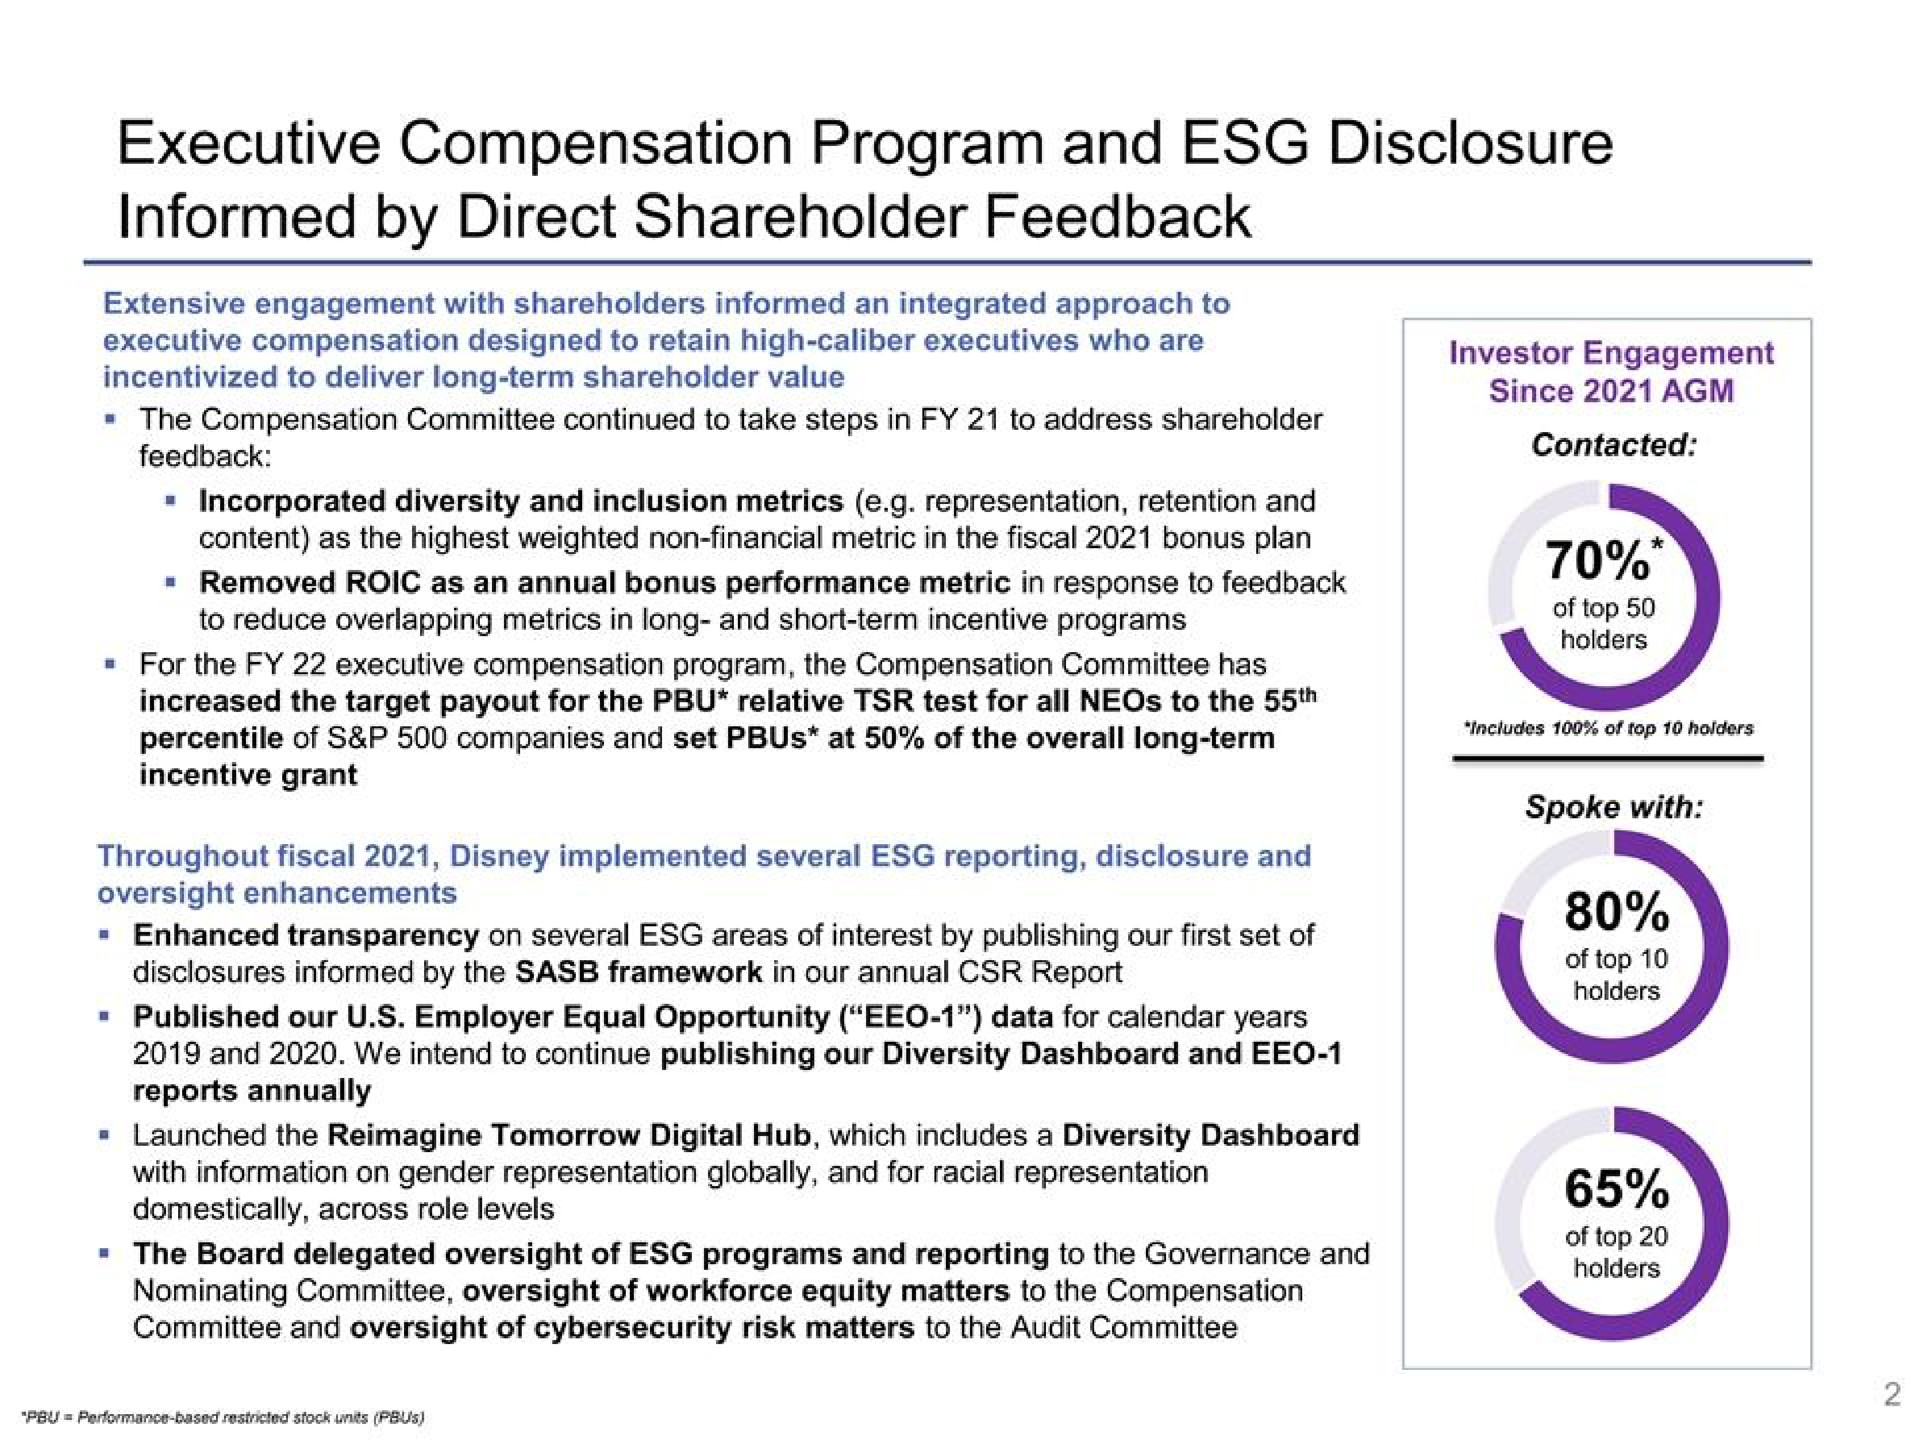 executive compensation program and disclosure informed by direct shareholder feedback | Disney